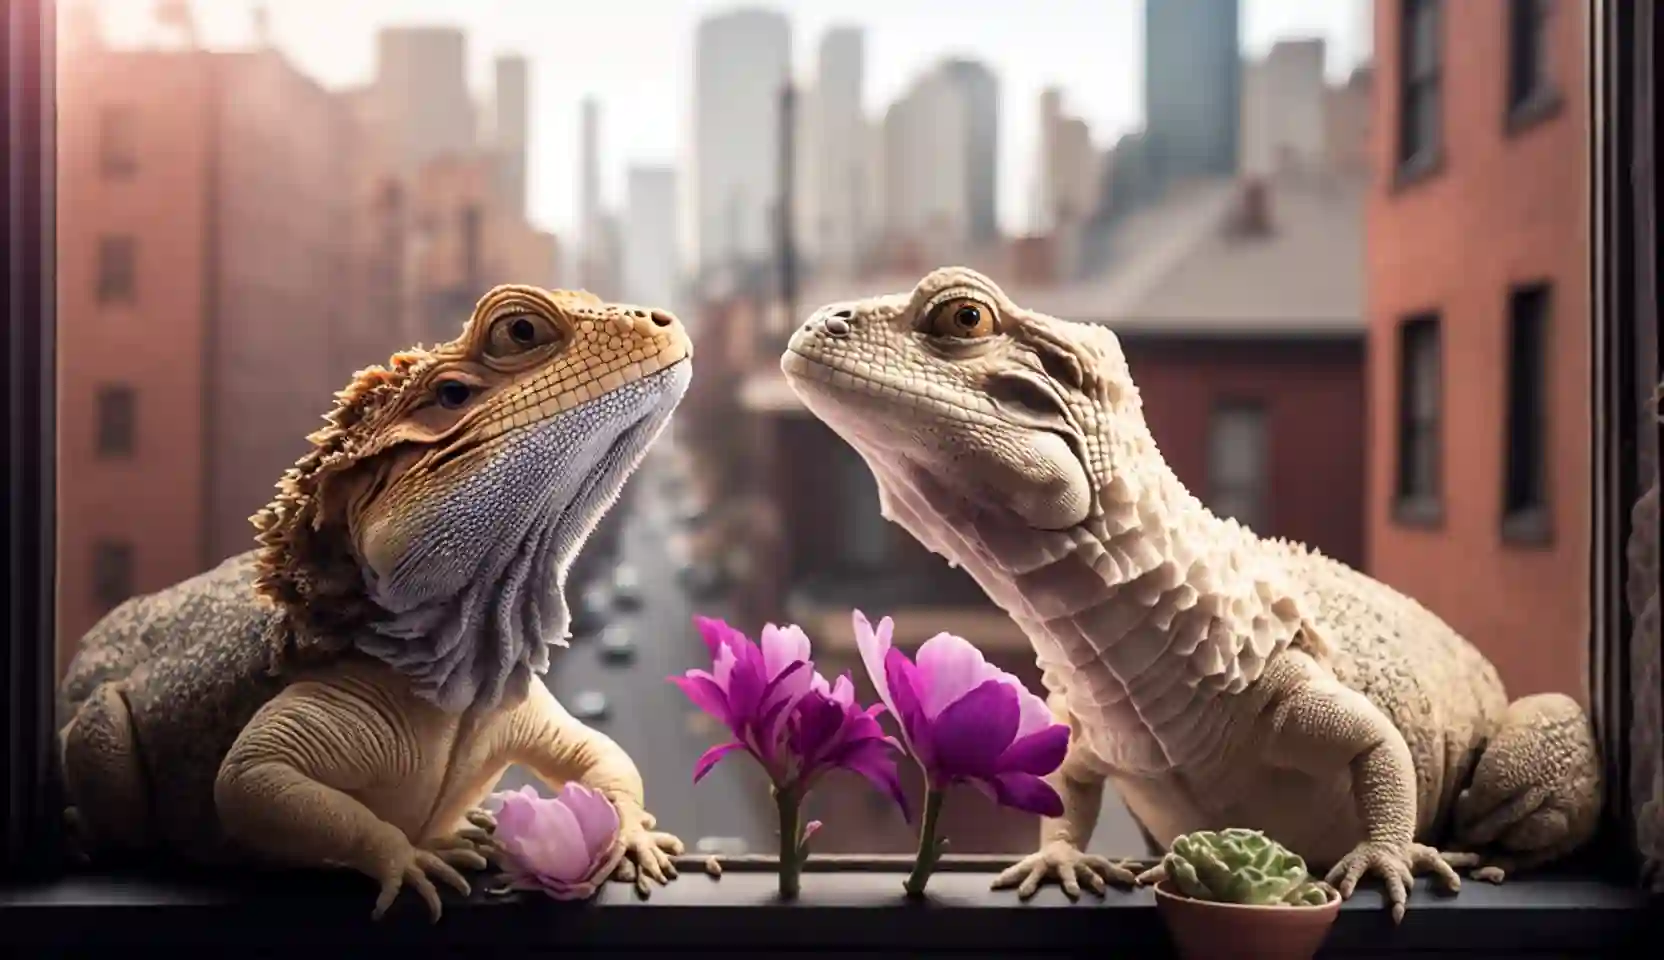 Can Bearded Dragons Eat Petunias?